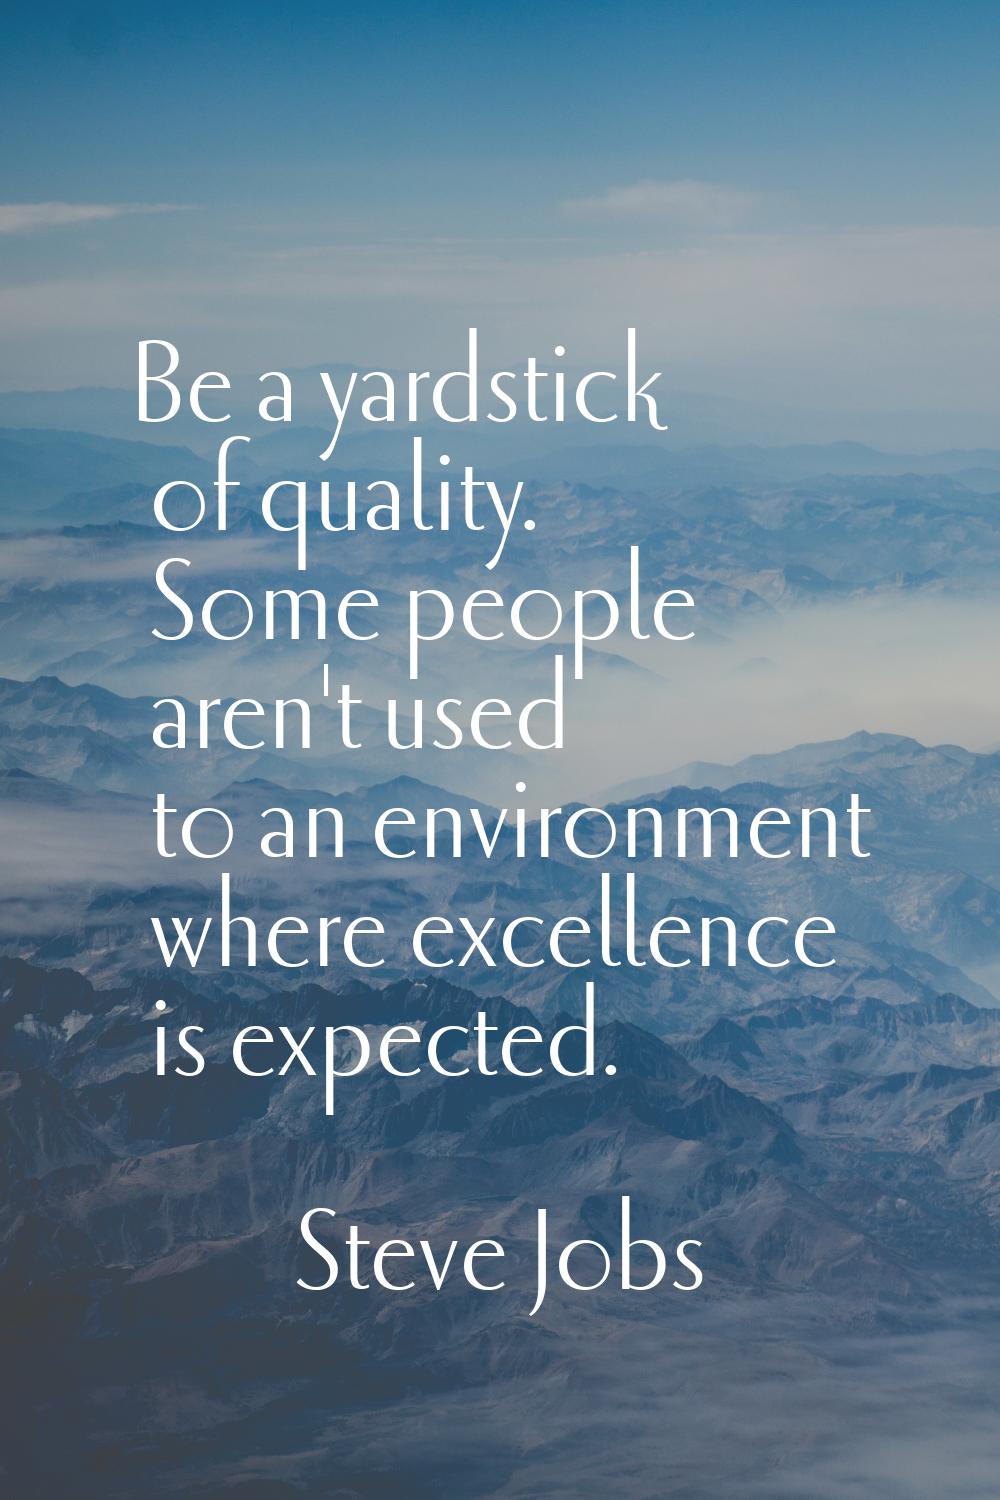 Be a yardstick of quality. Some people aren't used to an environment where excellence is expected.